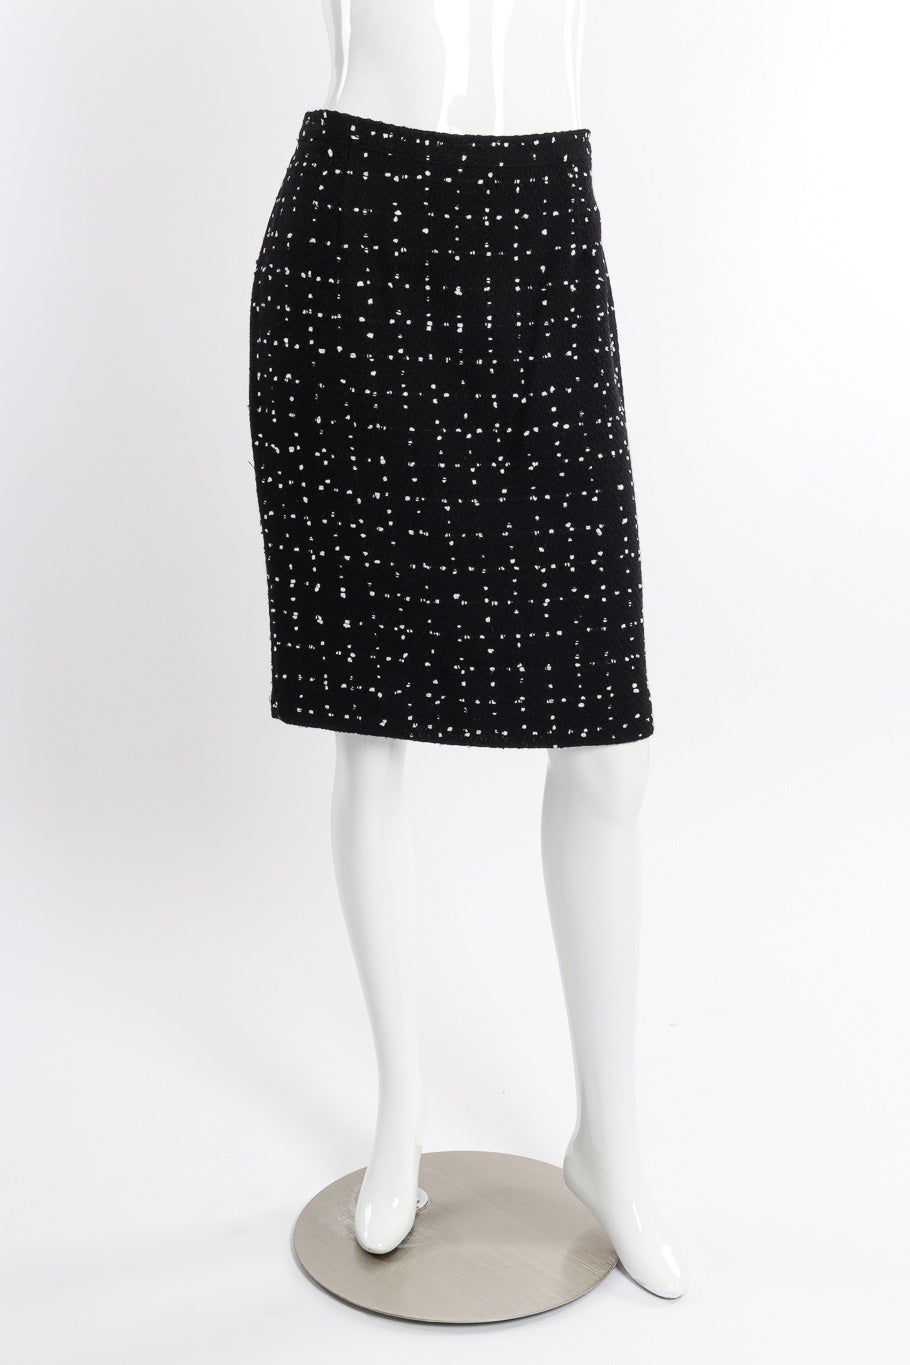 Vintage Moschino Dot Bouclé Jacket and Skirt Set skirt front view on mannequin @recessla